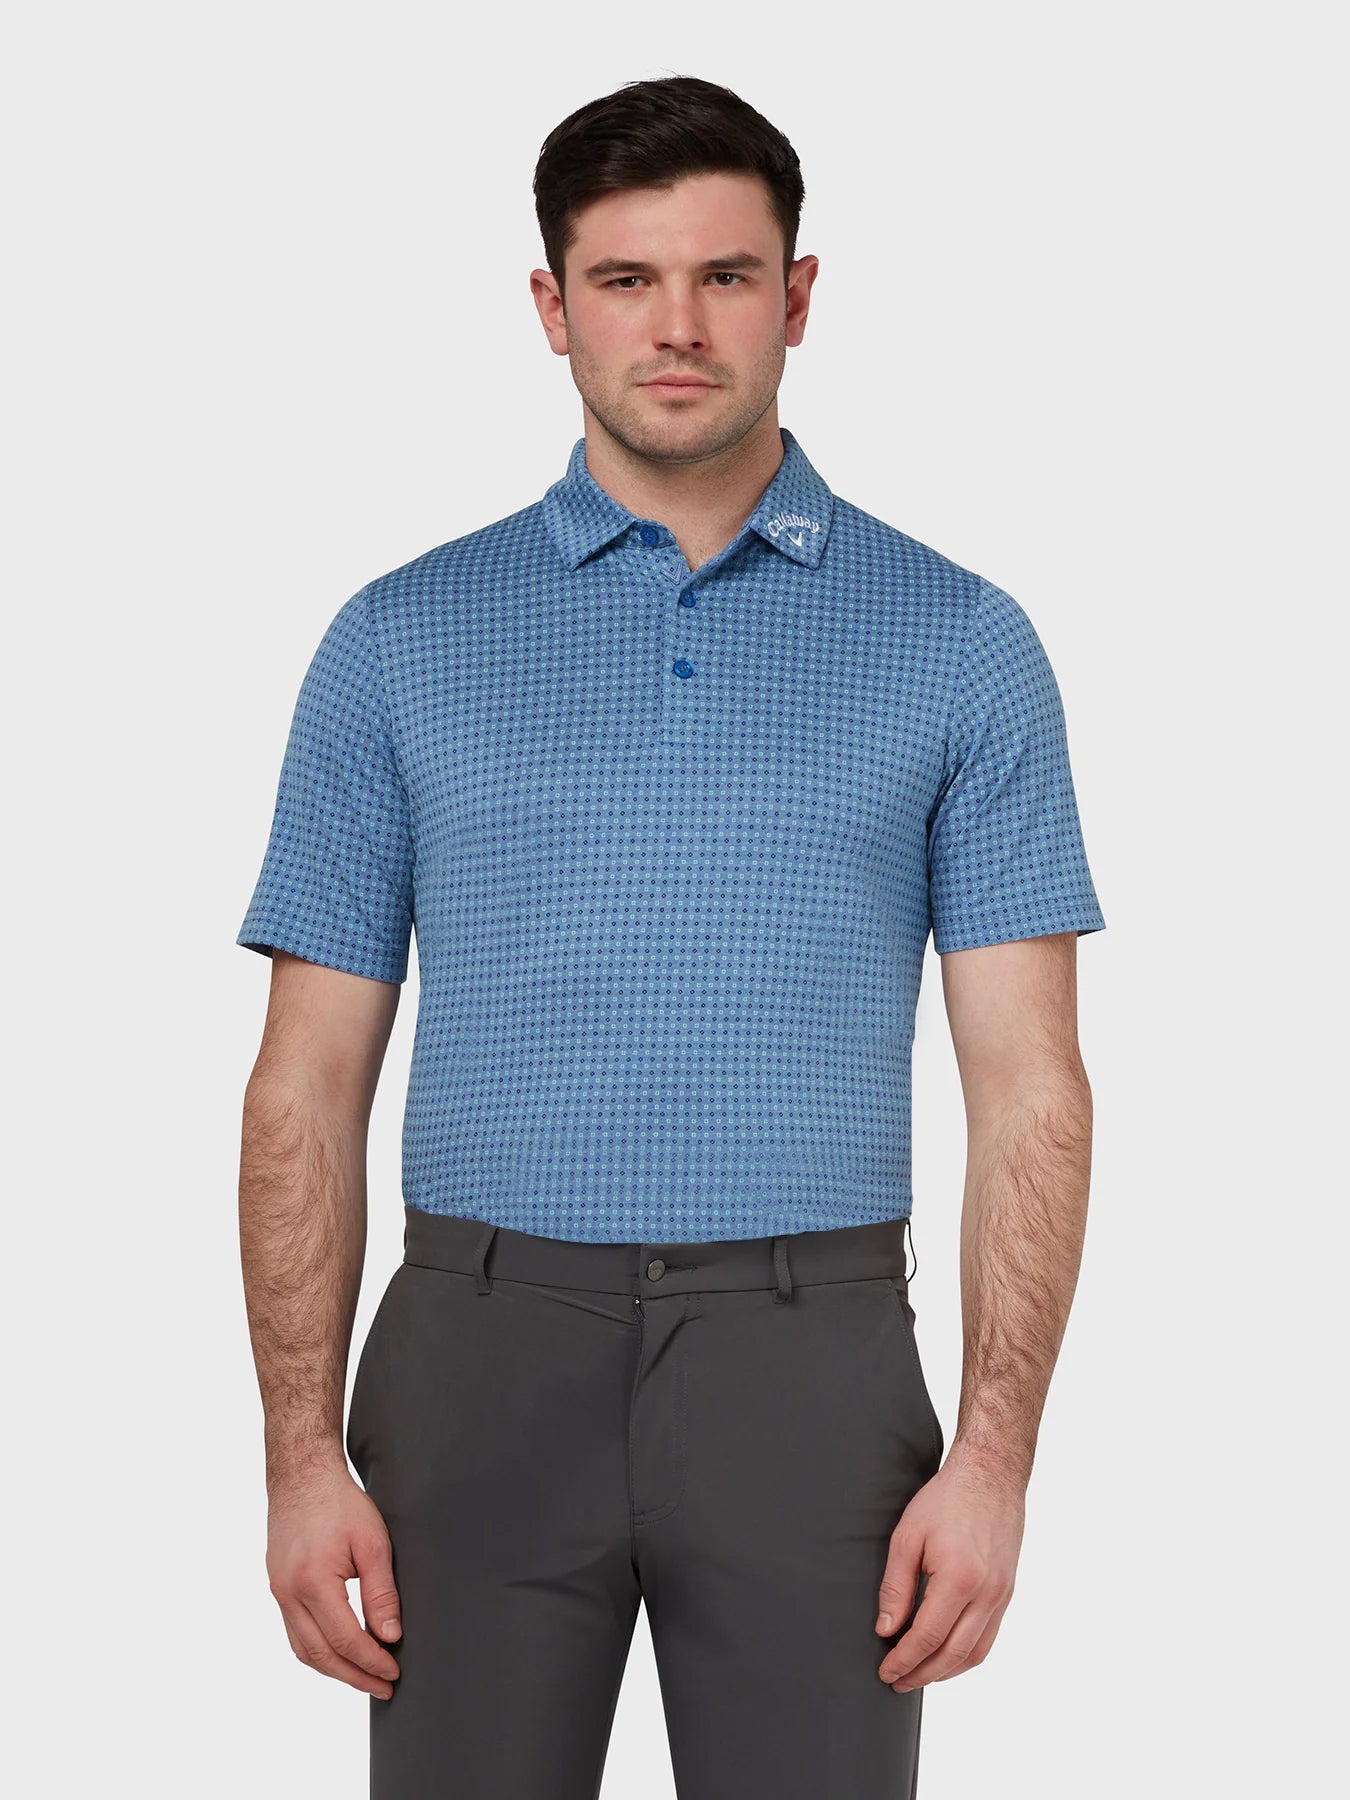 View Soft Touch Micro Print Polo In Magnetic Blue Heather Magnetic Blue Heather XXXL information